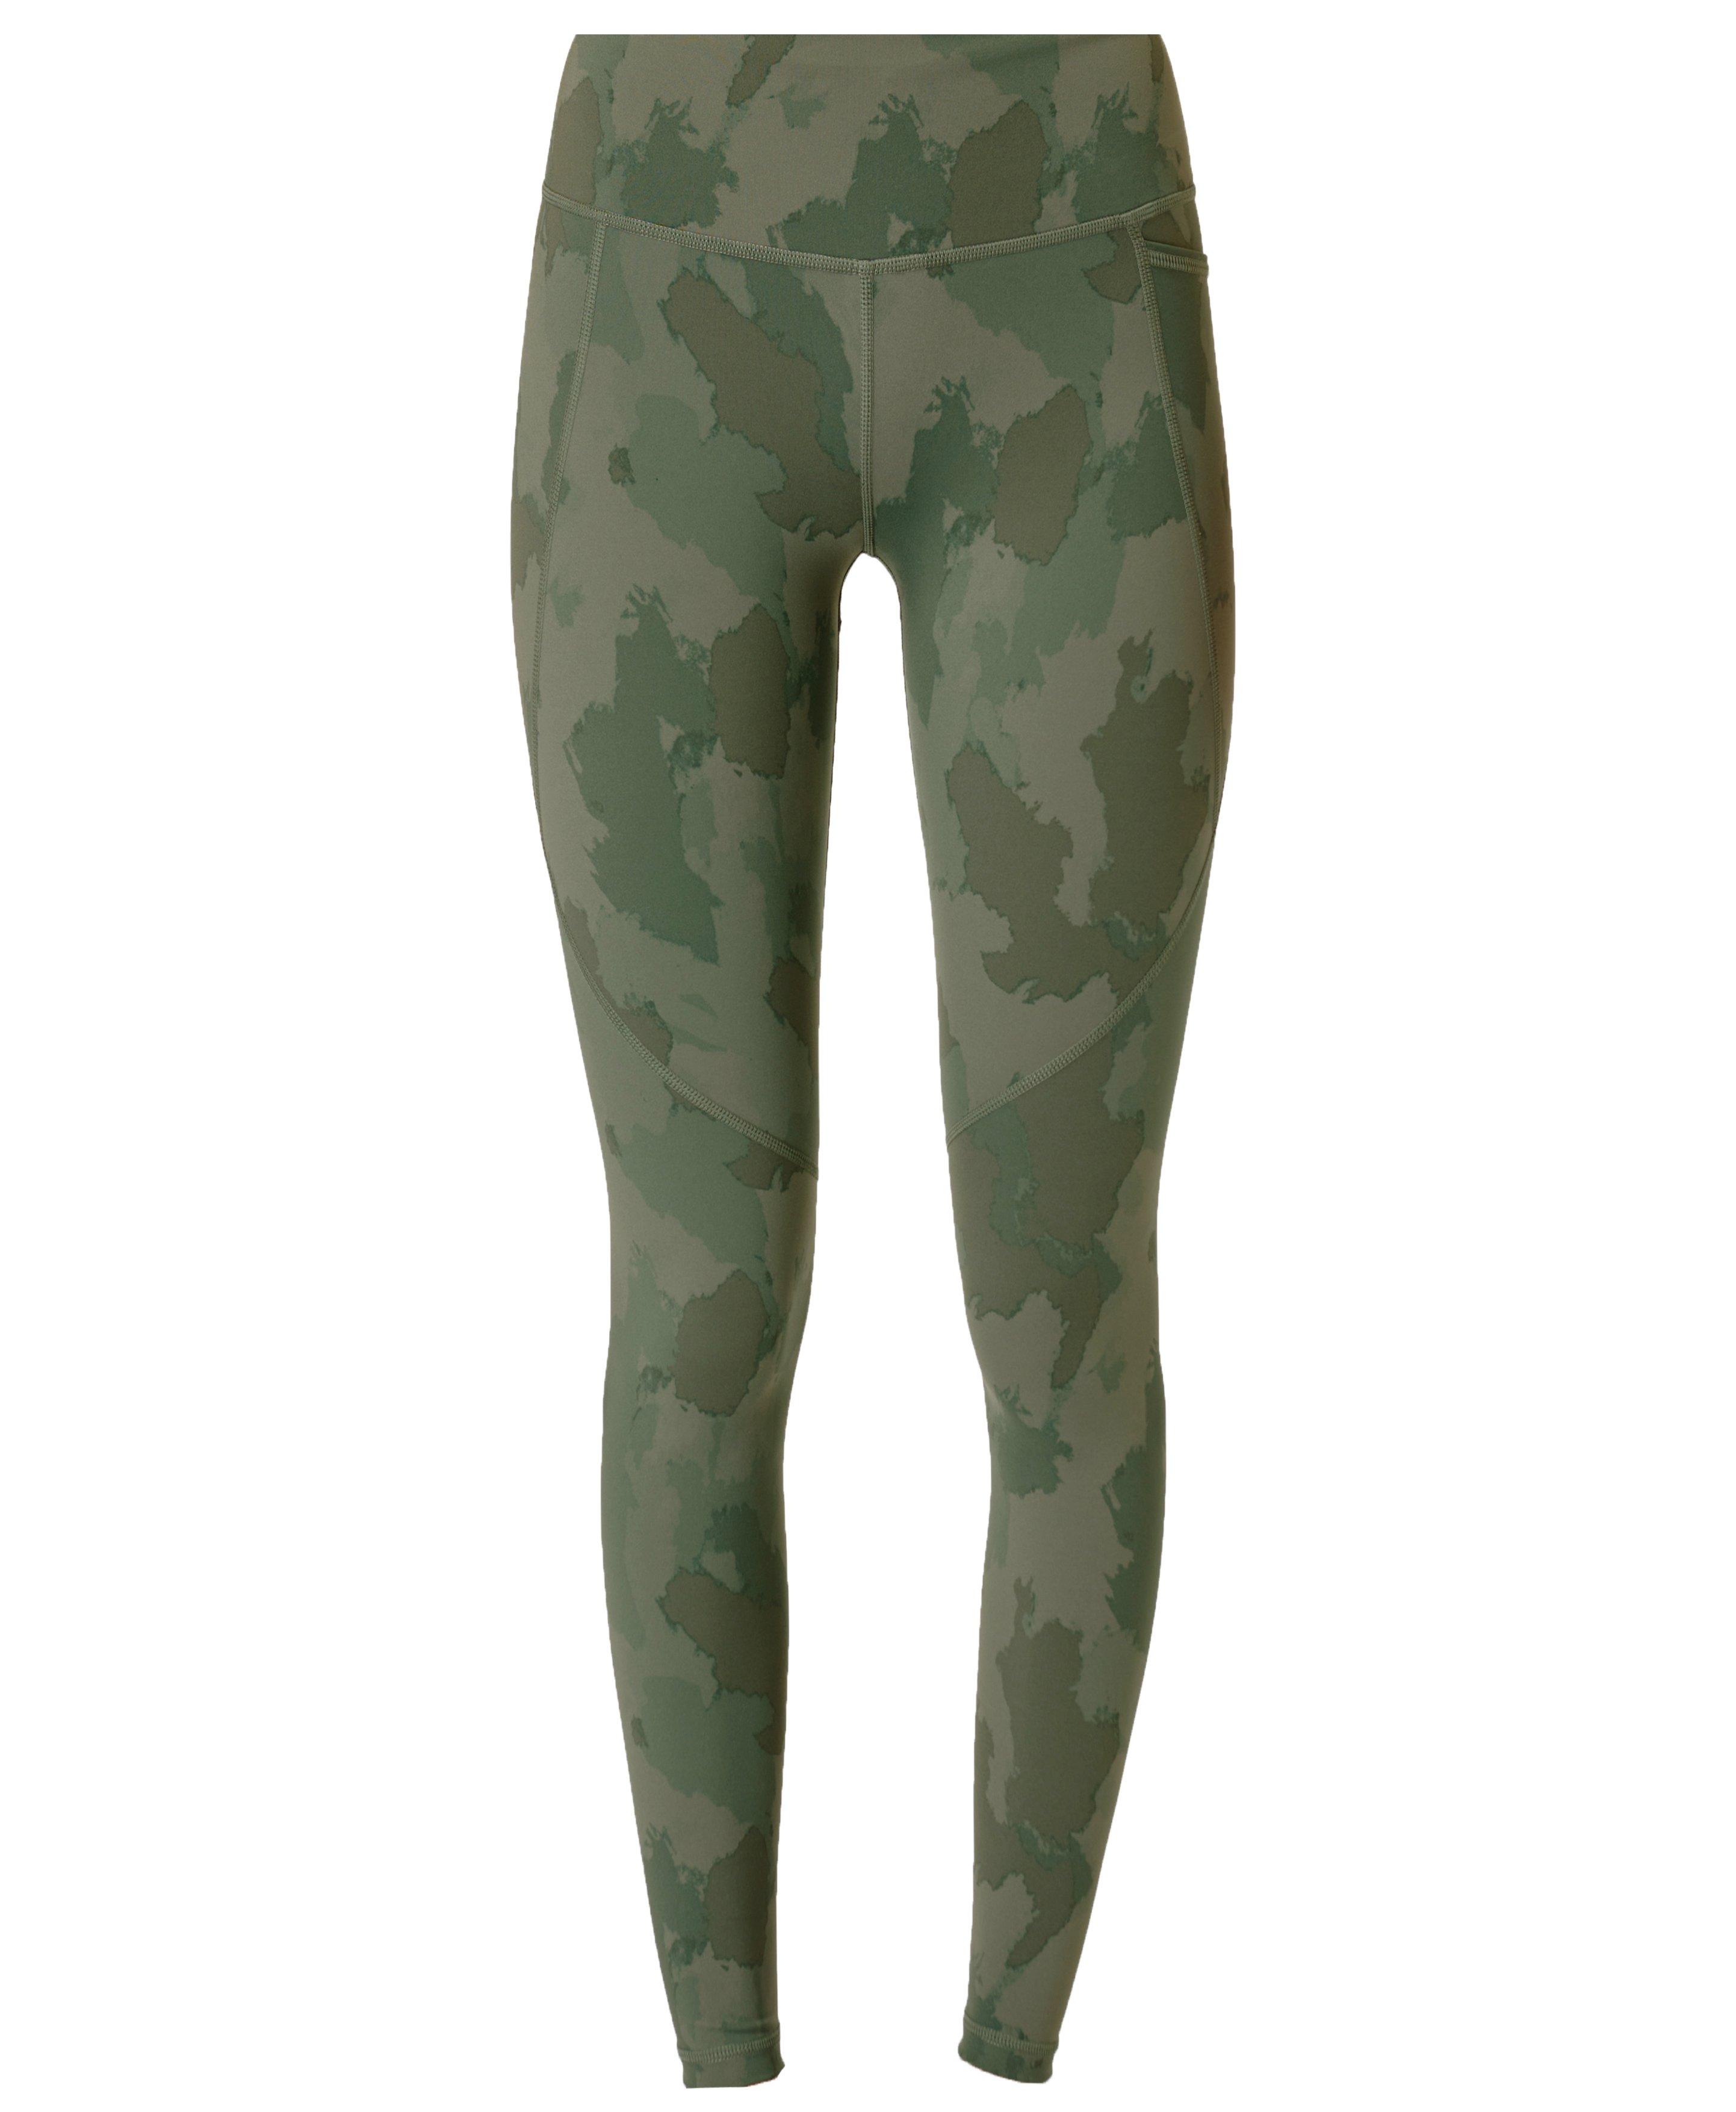 Camo Printed Leggings Women Sports Apparel Fitness Military Activewear  Shaping Sportswear Camouflage Green Brown Gym Gear Yoga Pants Tight 